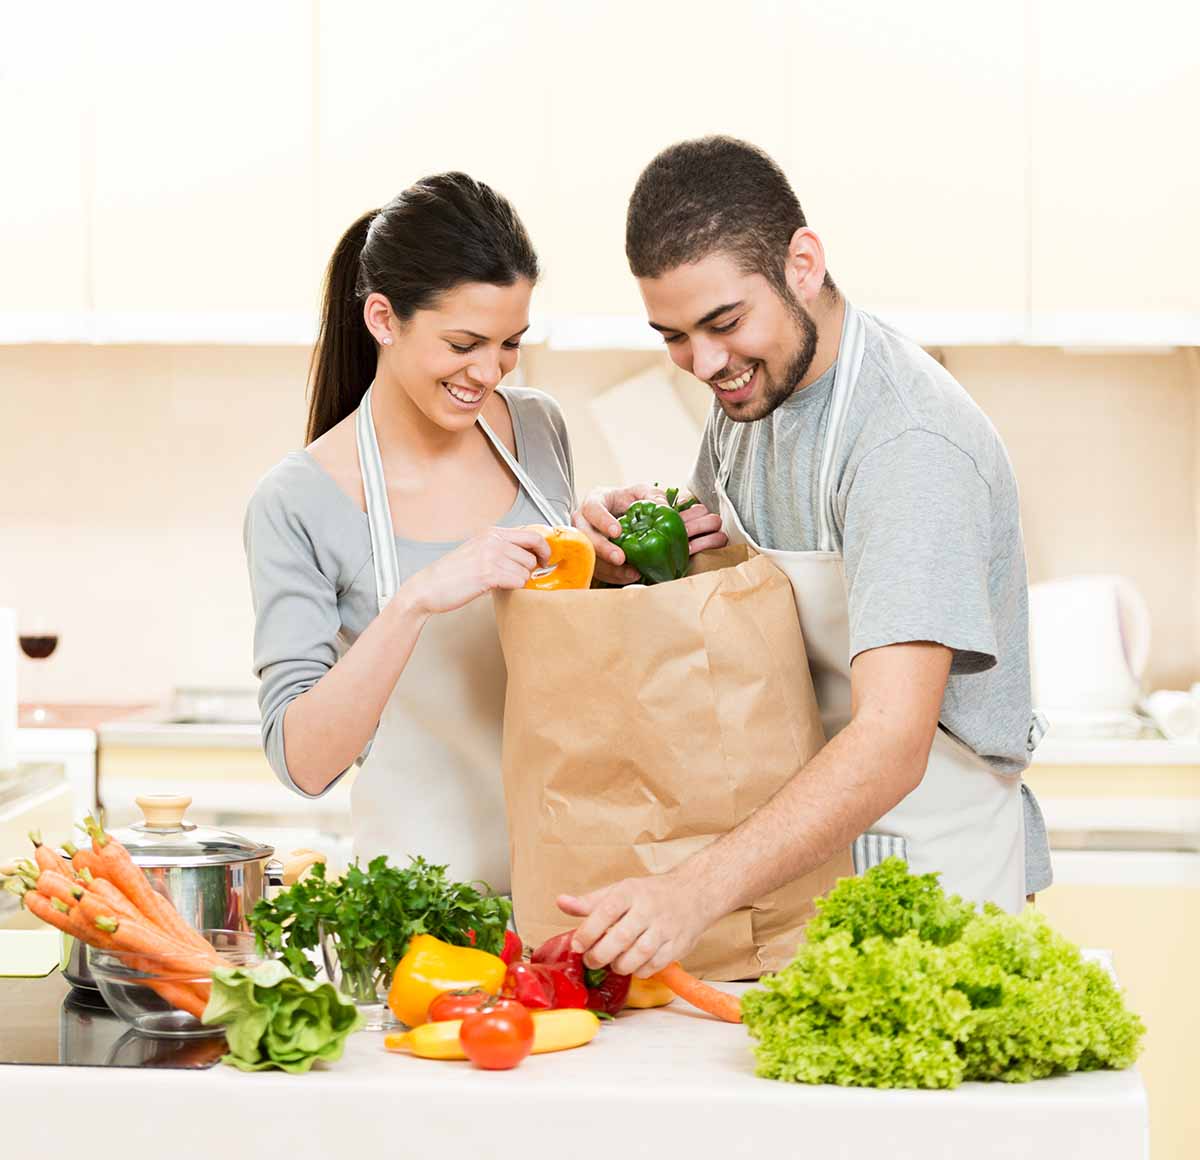 Couple unpacking groceries recommended by DIYK staff